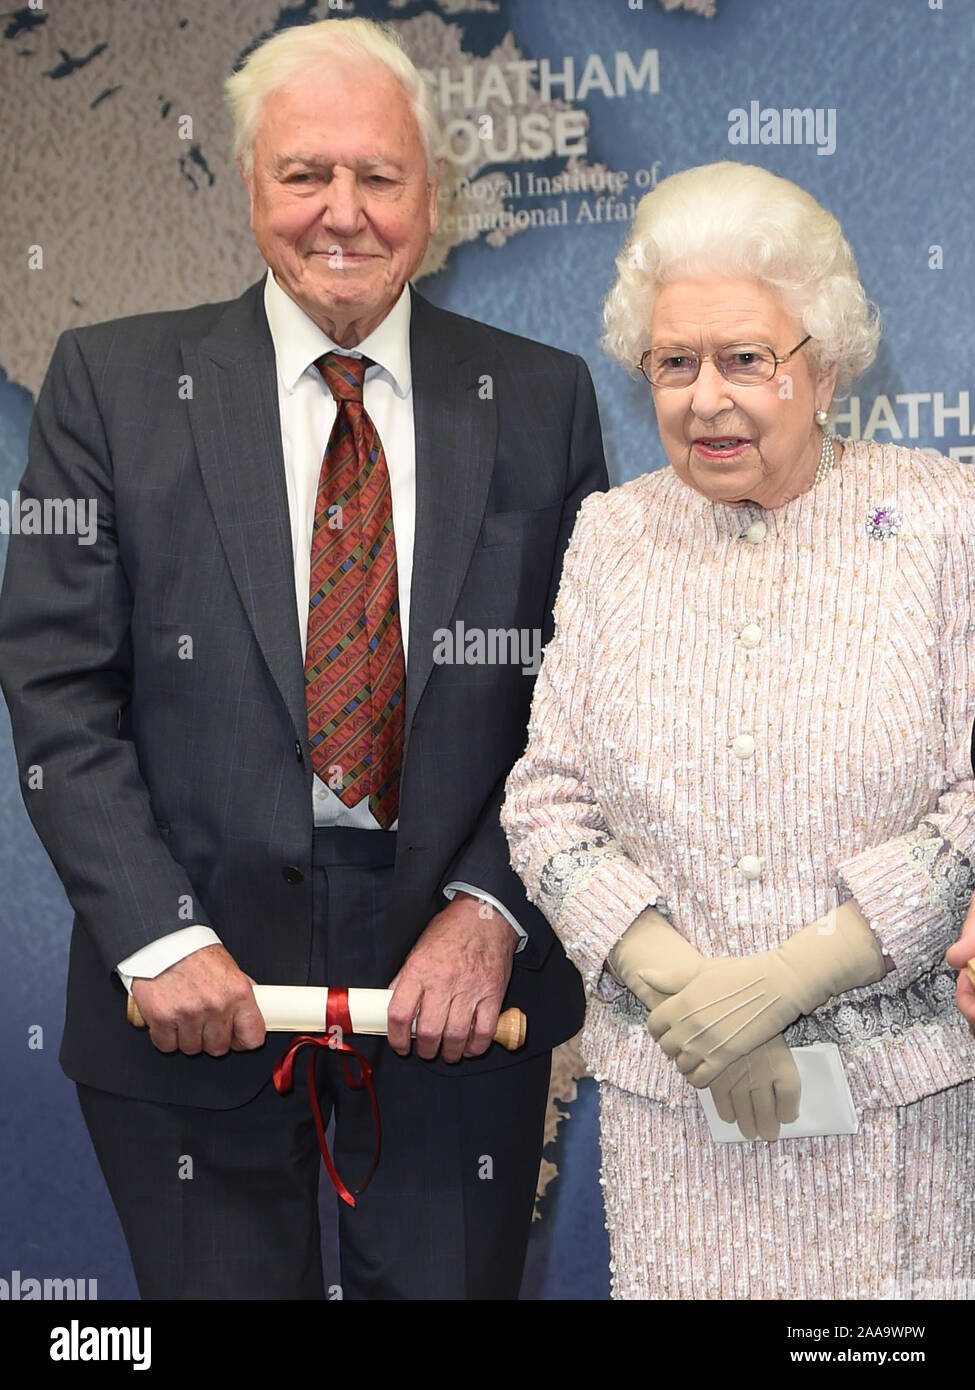 Queen Elizabeth II alongside Sir David Attenborough after she presented both him and Julian Hector, Head of the BBC Natural History Unit, the 2019 Chatham House Prize at the Royal institute of International Affairs, Chatham House, London. Stock Photo